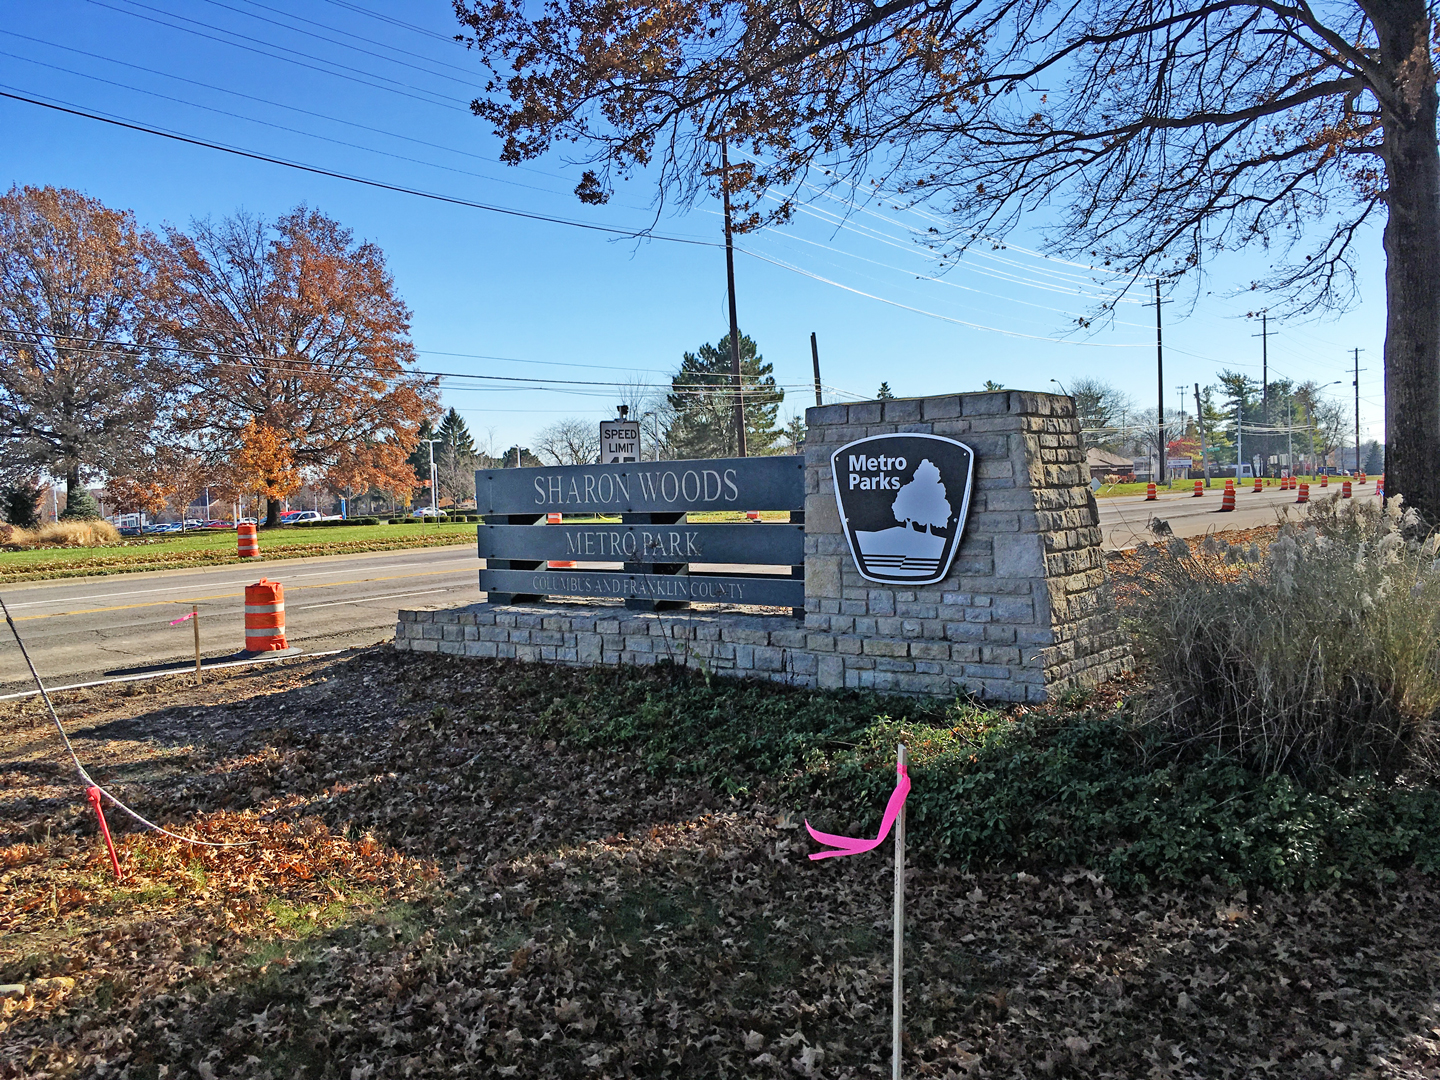 The current entrance to Sharon Woods Metro Park.